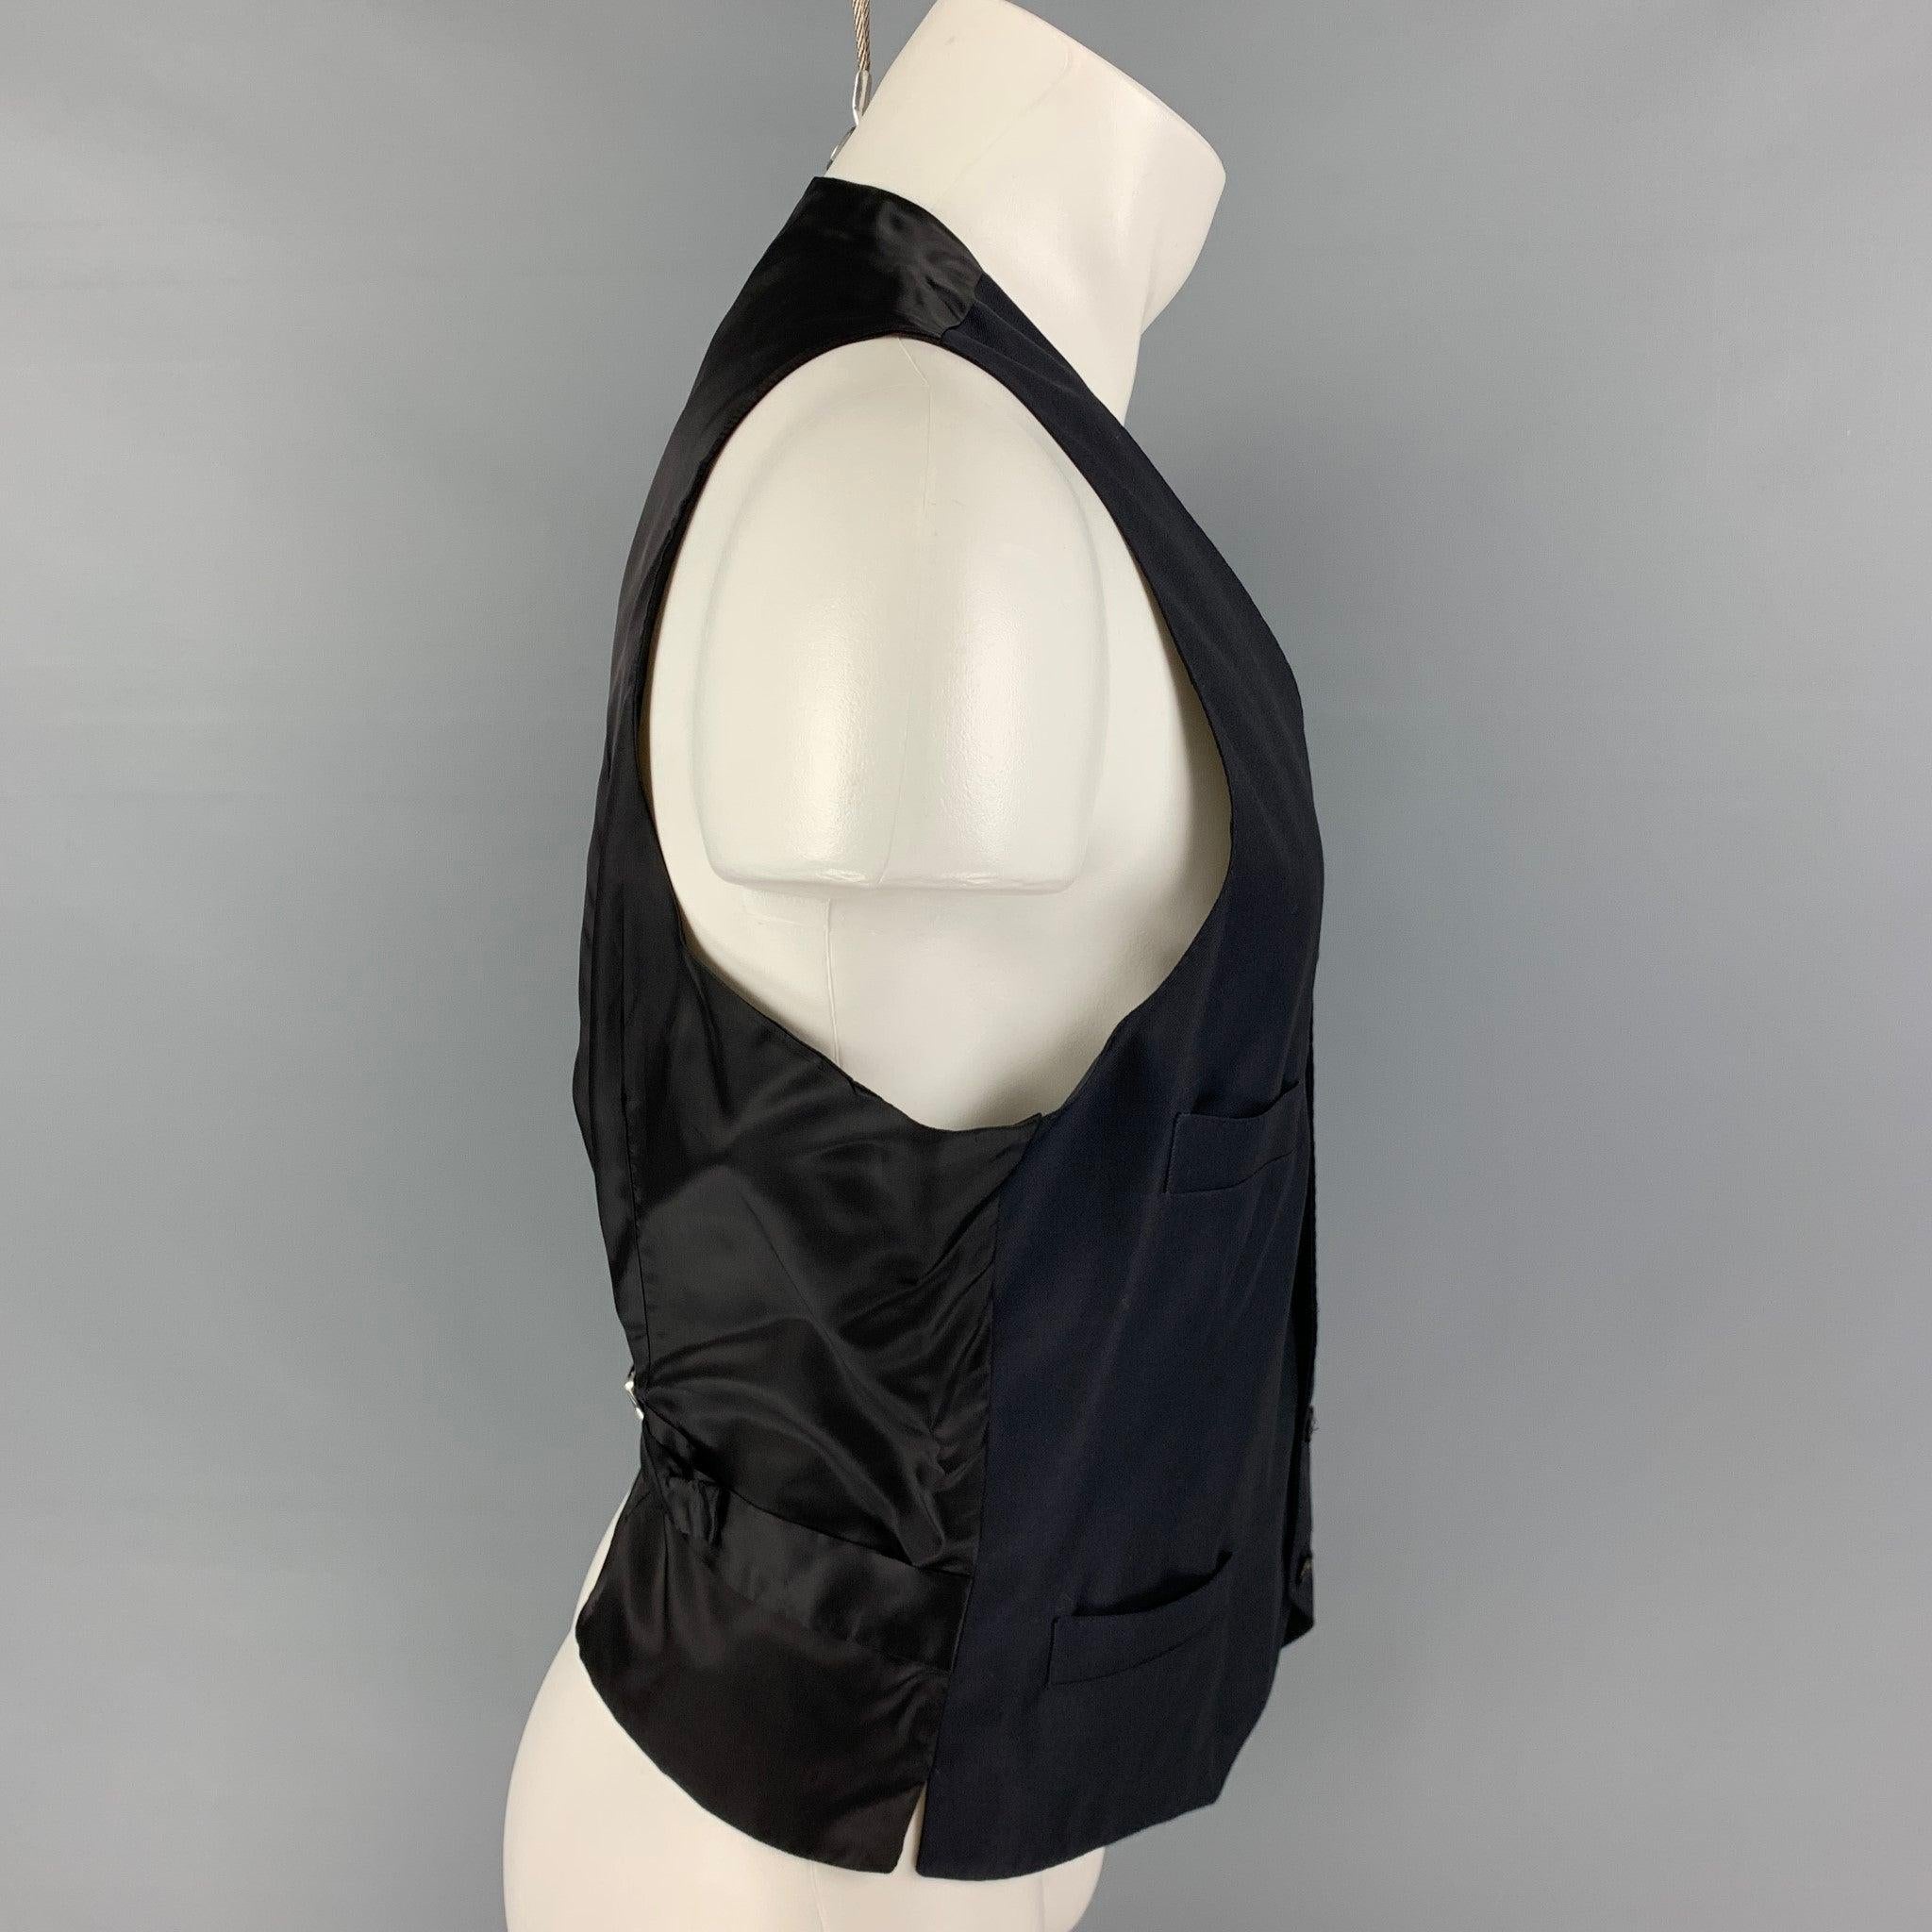 GIORGIO ARMANI vest comes in a navy wool / cashmere featuring a adjustable back, slit pockets, and a buttoned closure. Made in Italy.
Excellent
Pre-Owned Condition. 

Marked:   50  

Measurements: 
 
Shoulder: 14 inches Chest: 40 inches Length: 22